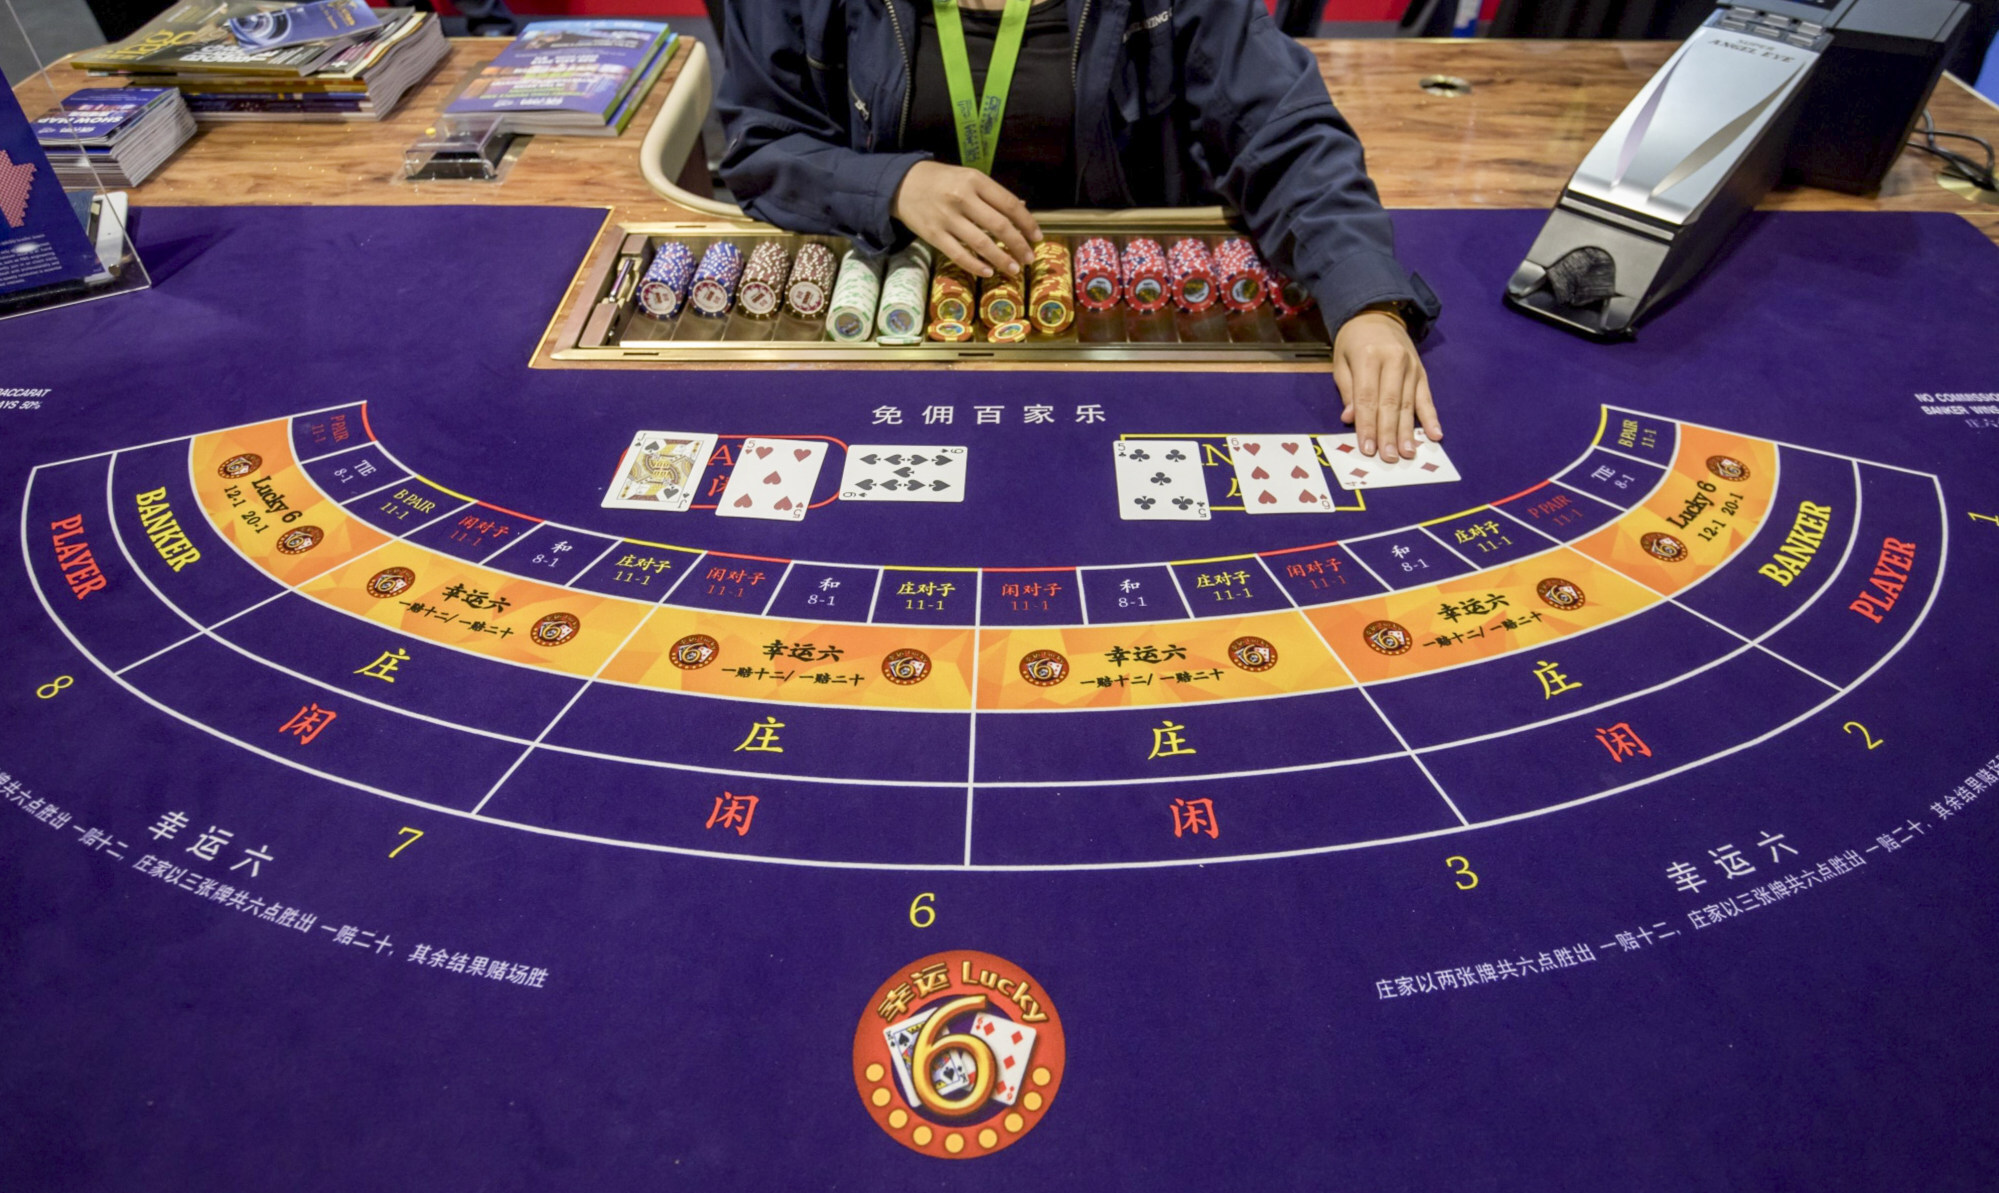 Junket operators such as Suncity Group once accounted for more than 70 per cent of Macau’s gaming revenue. Photo: Bloomberg